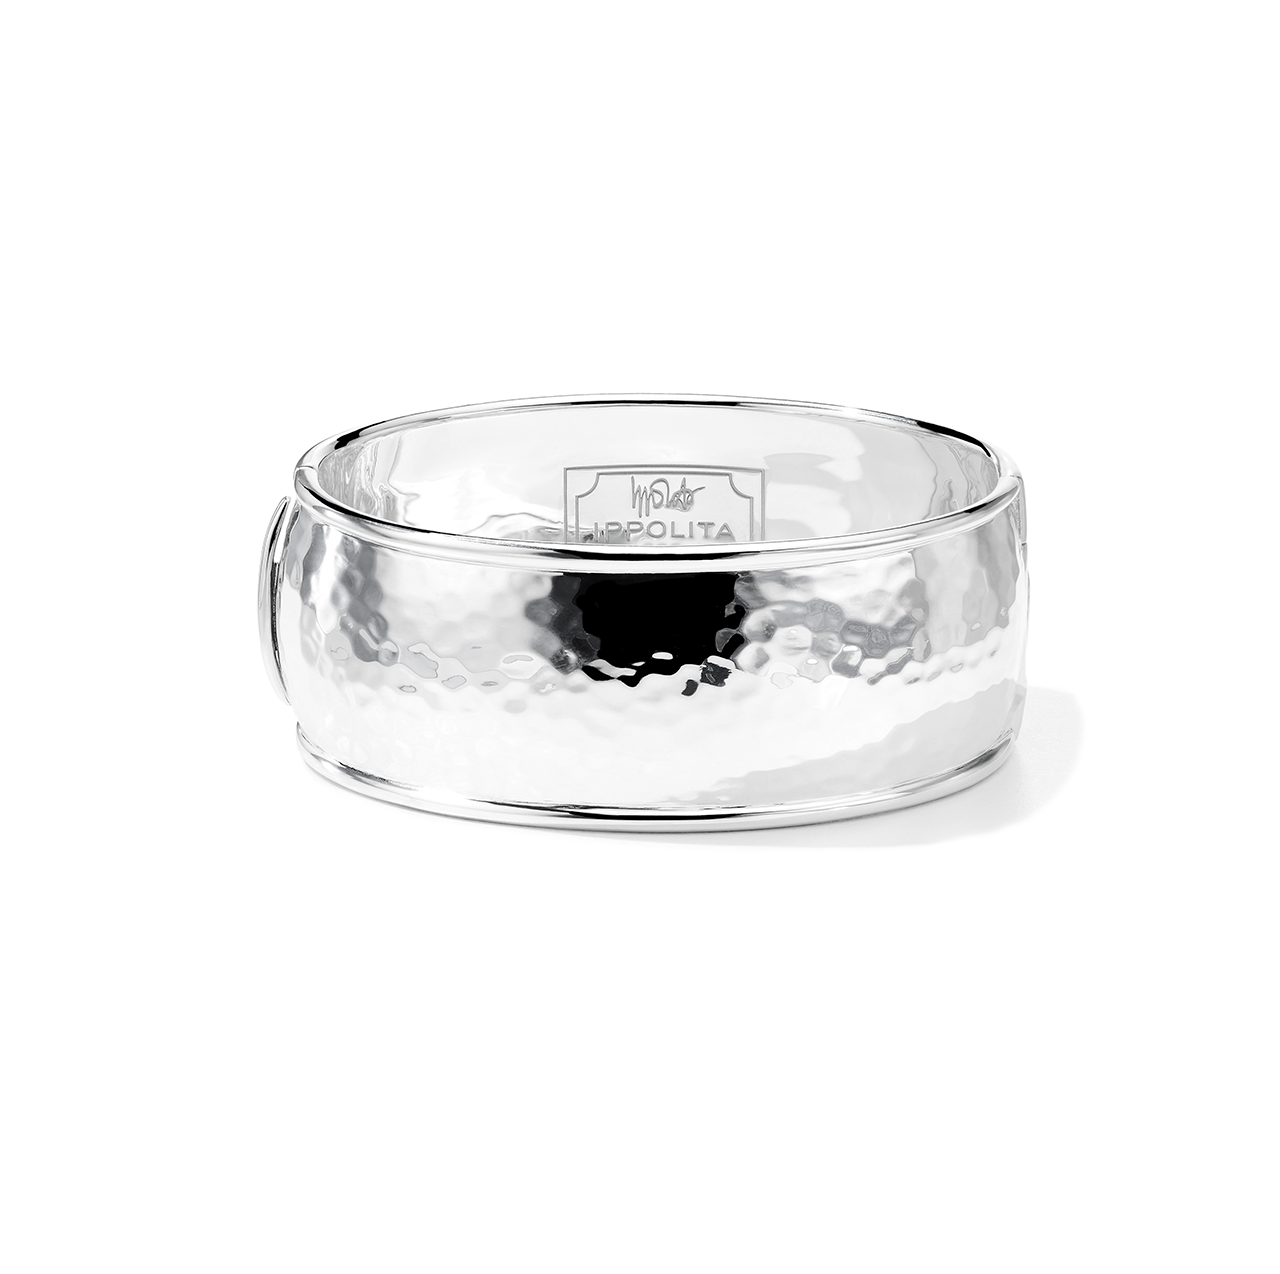 IPPOLITA Classico Sterling Silver Wide Goddess Hinged Bangle